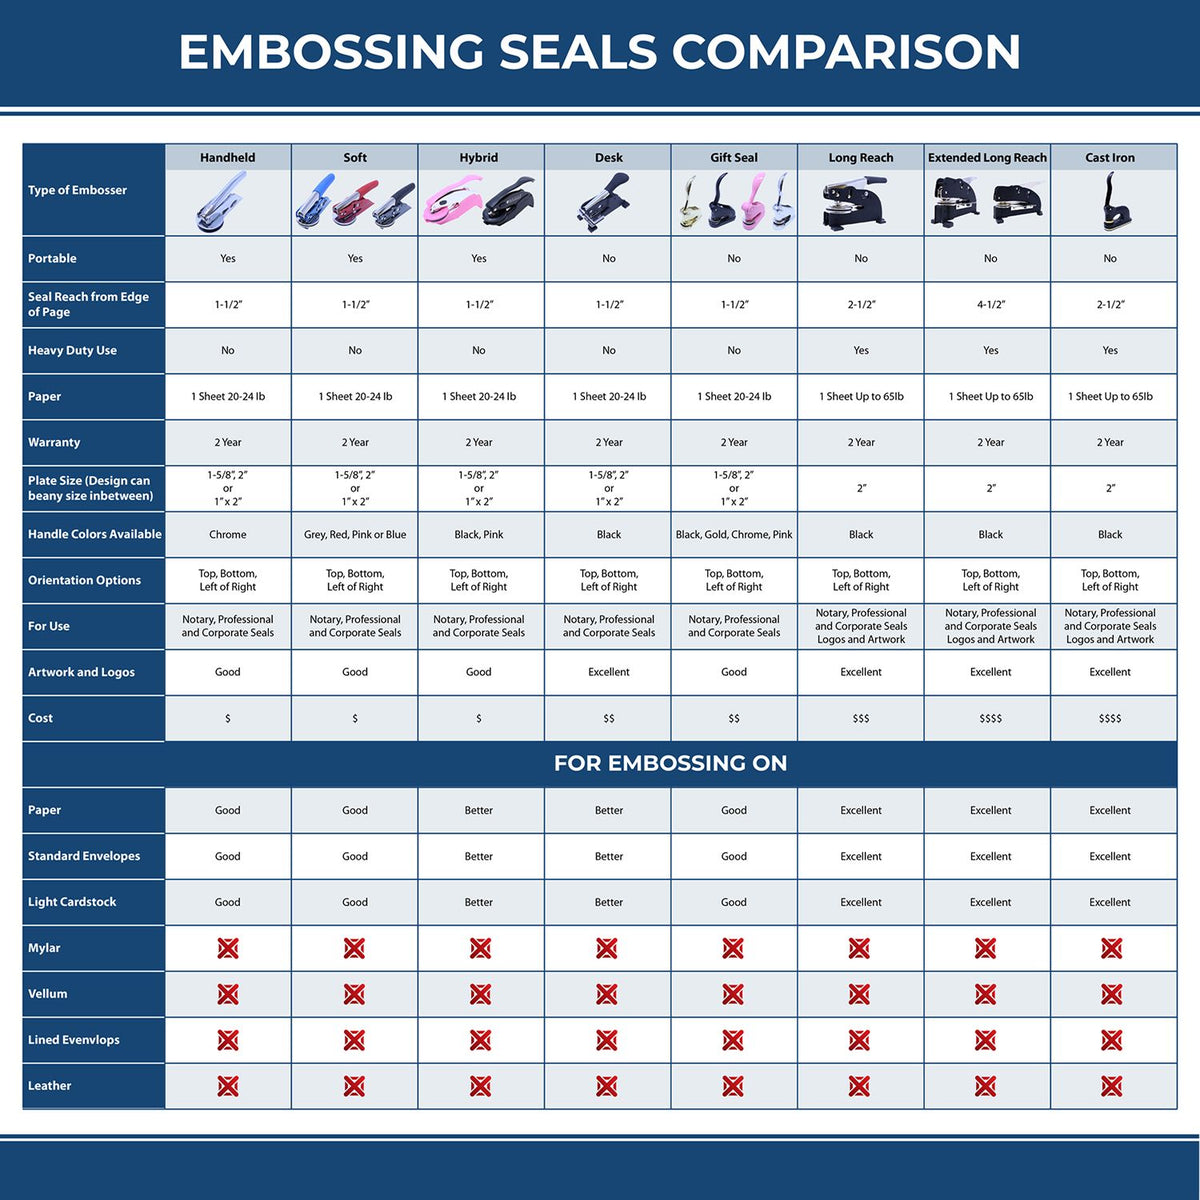 A comparison chart for the different types of mount models available for the Long Reach Minnesota Land Surveyor Seal.